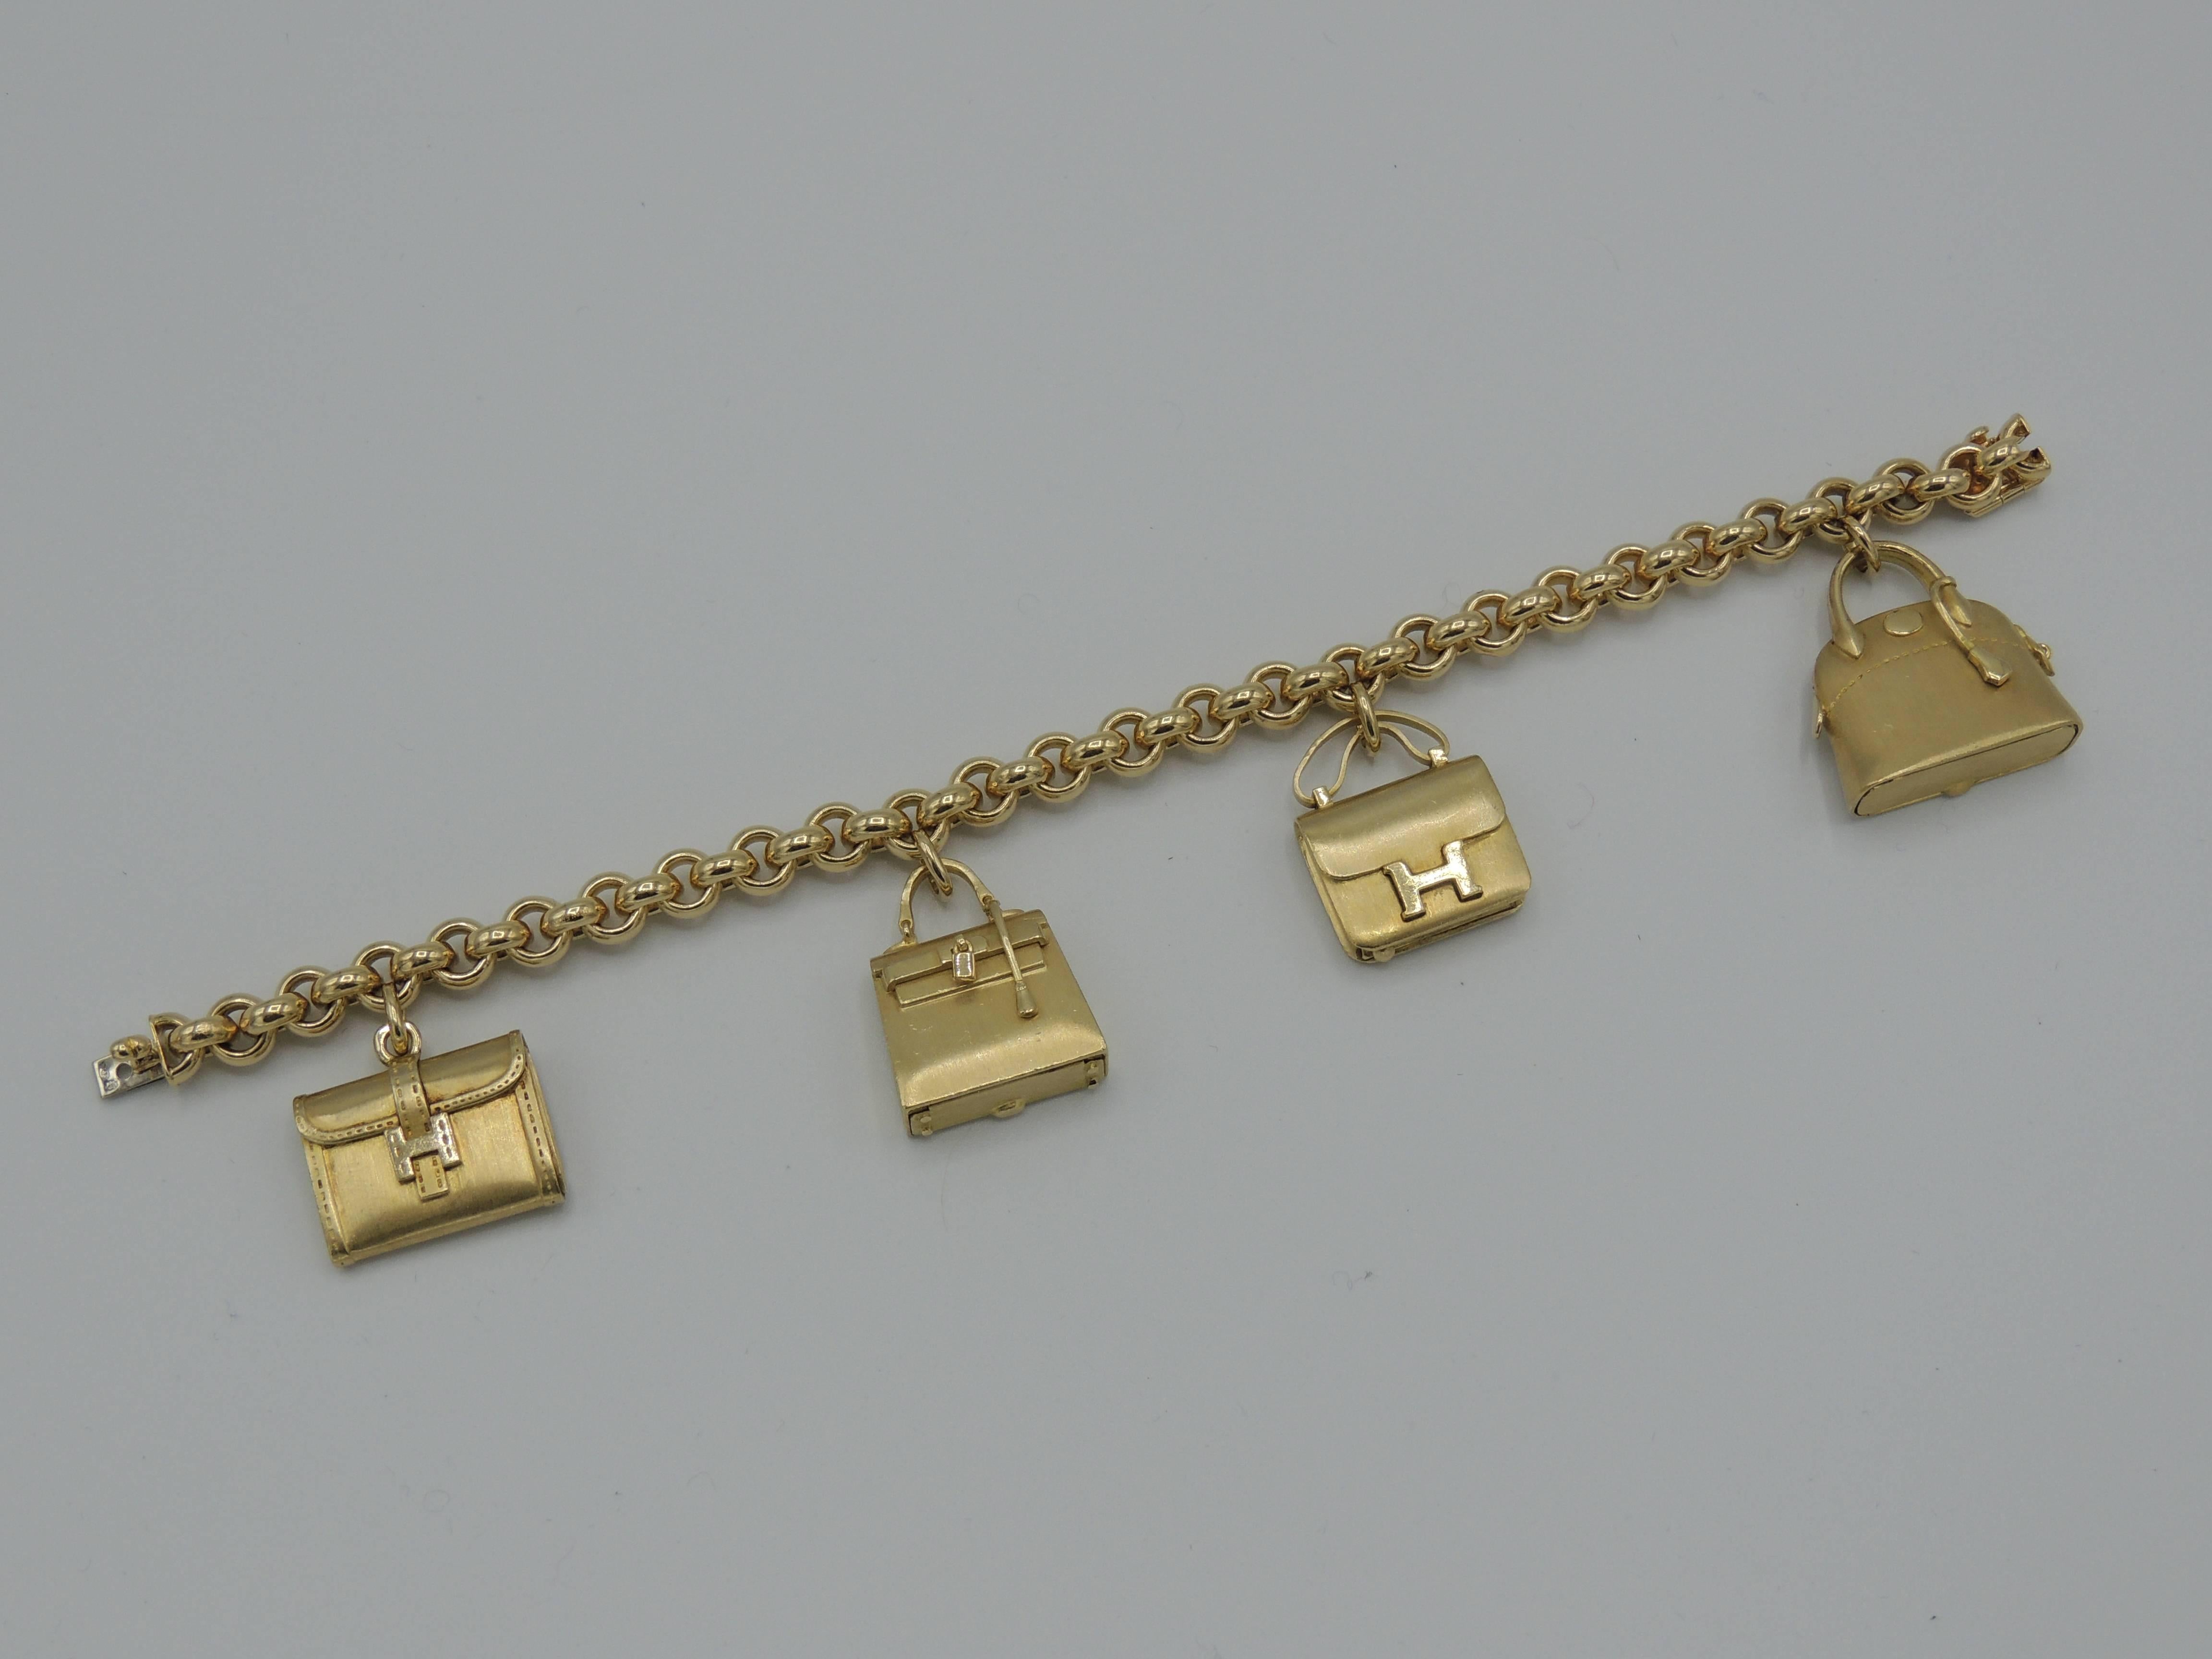 Extremey RARE and Beautiful Authentic Hermes Bracelet

Made in France in 1997

Called: 